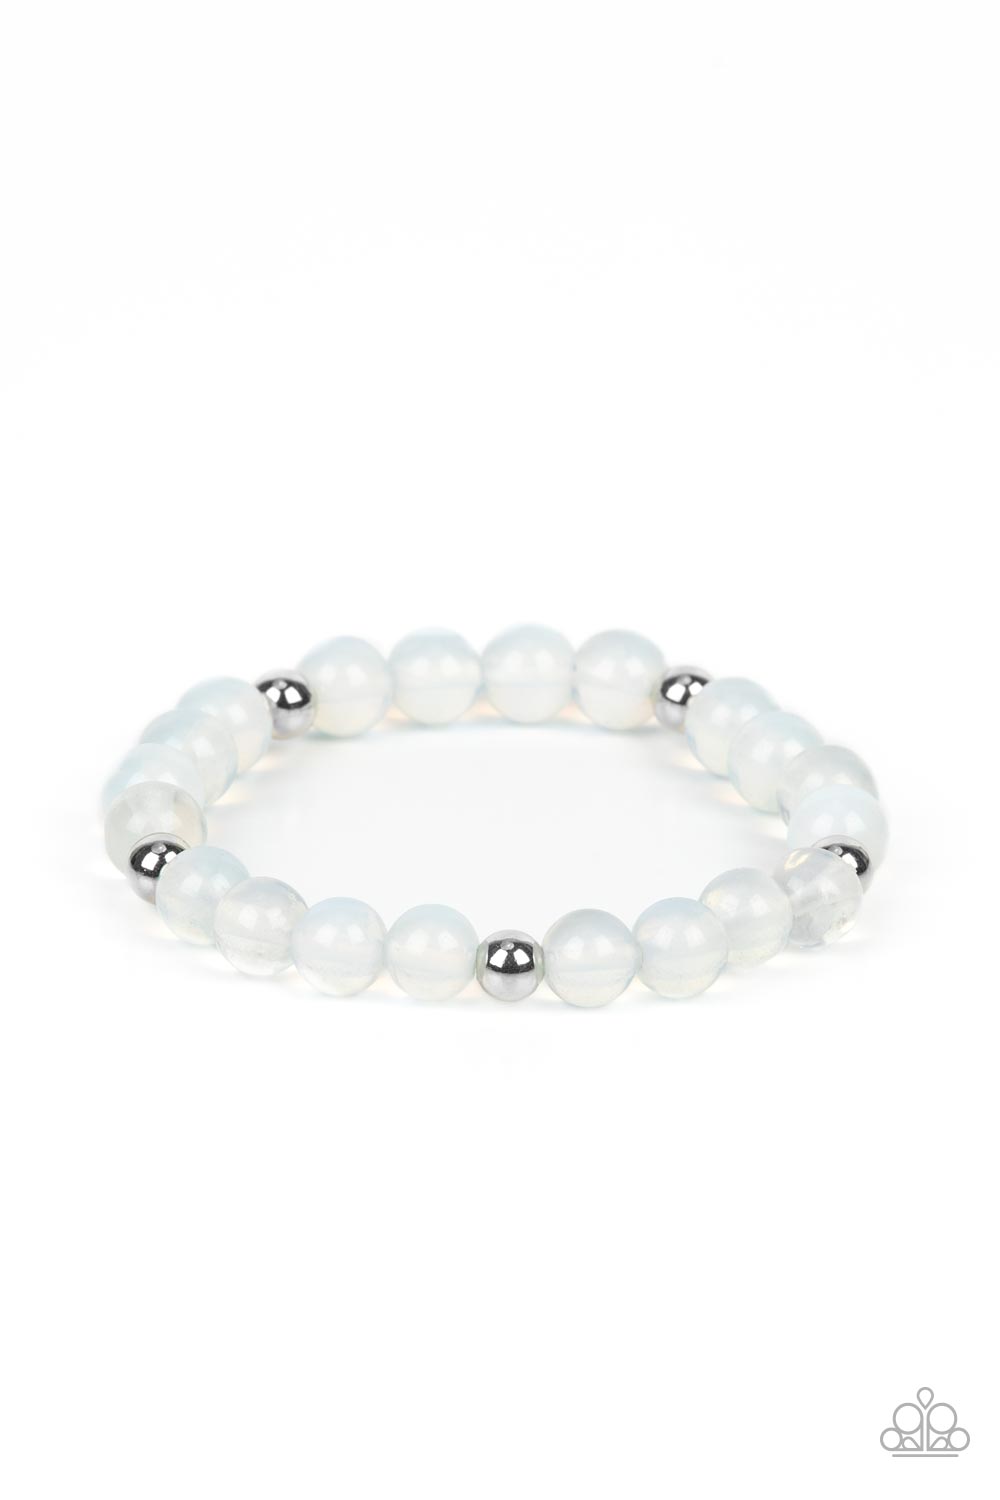 Paparazzi Bracelets - Forever and Daydream - White